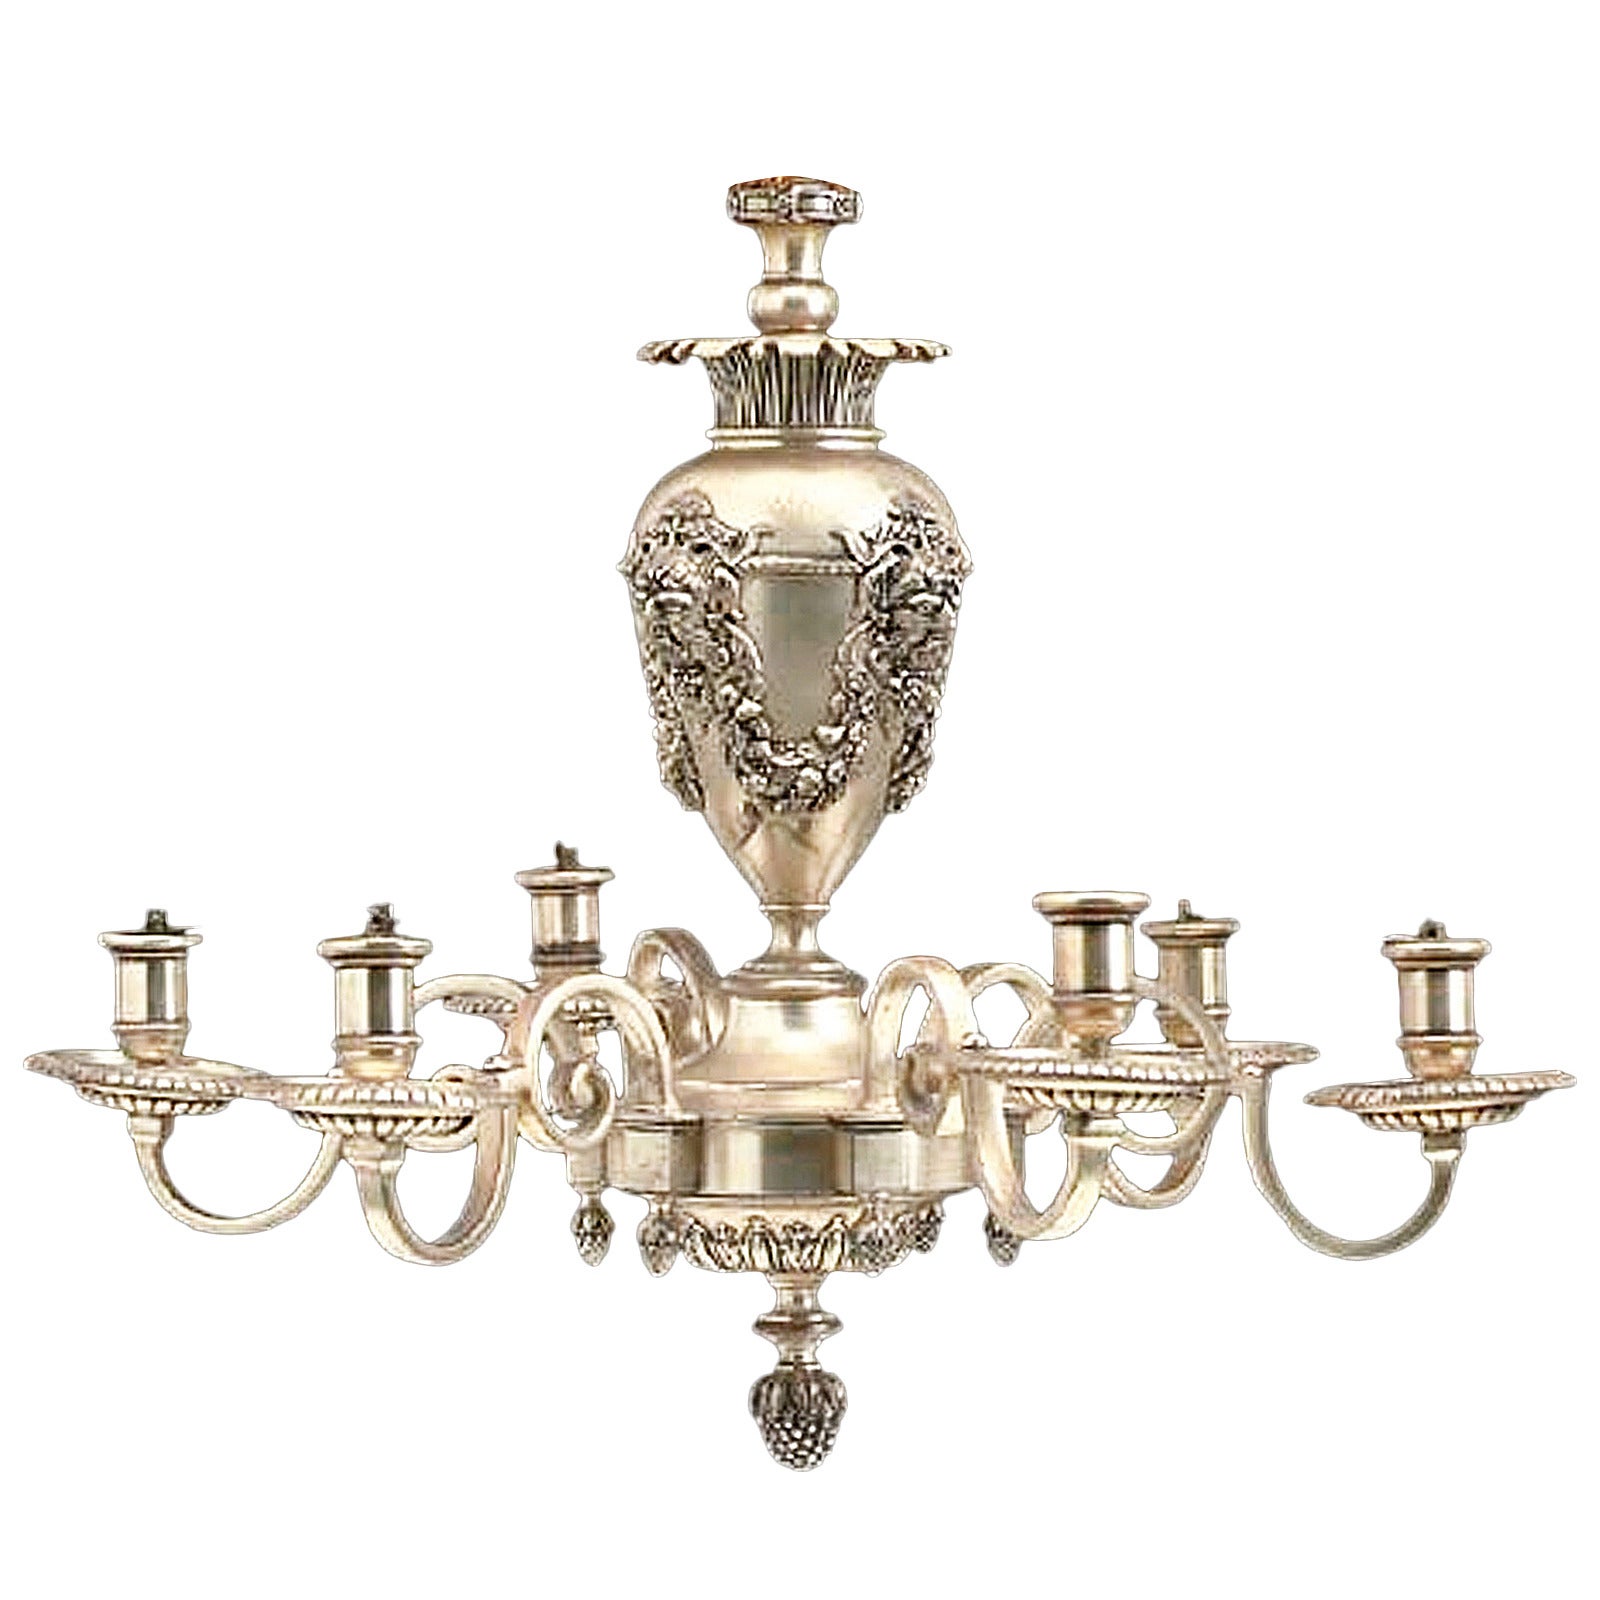 A Neoclassic Style Silvered-Metal Six-Light Chandelier Attributed to Caldwell For Sale